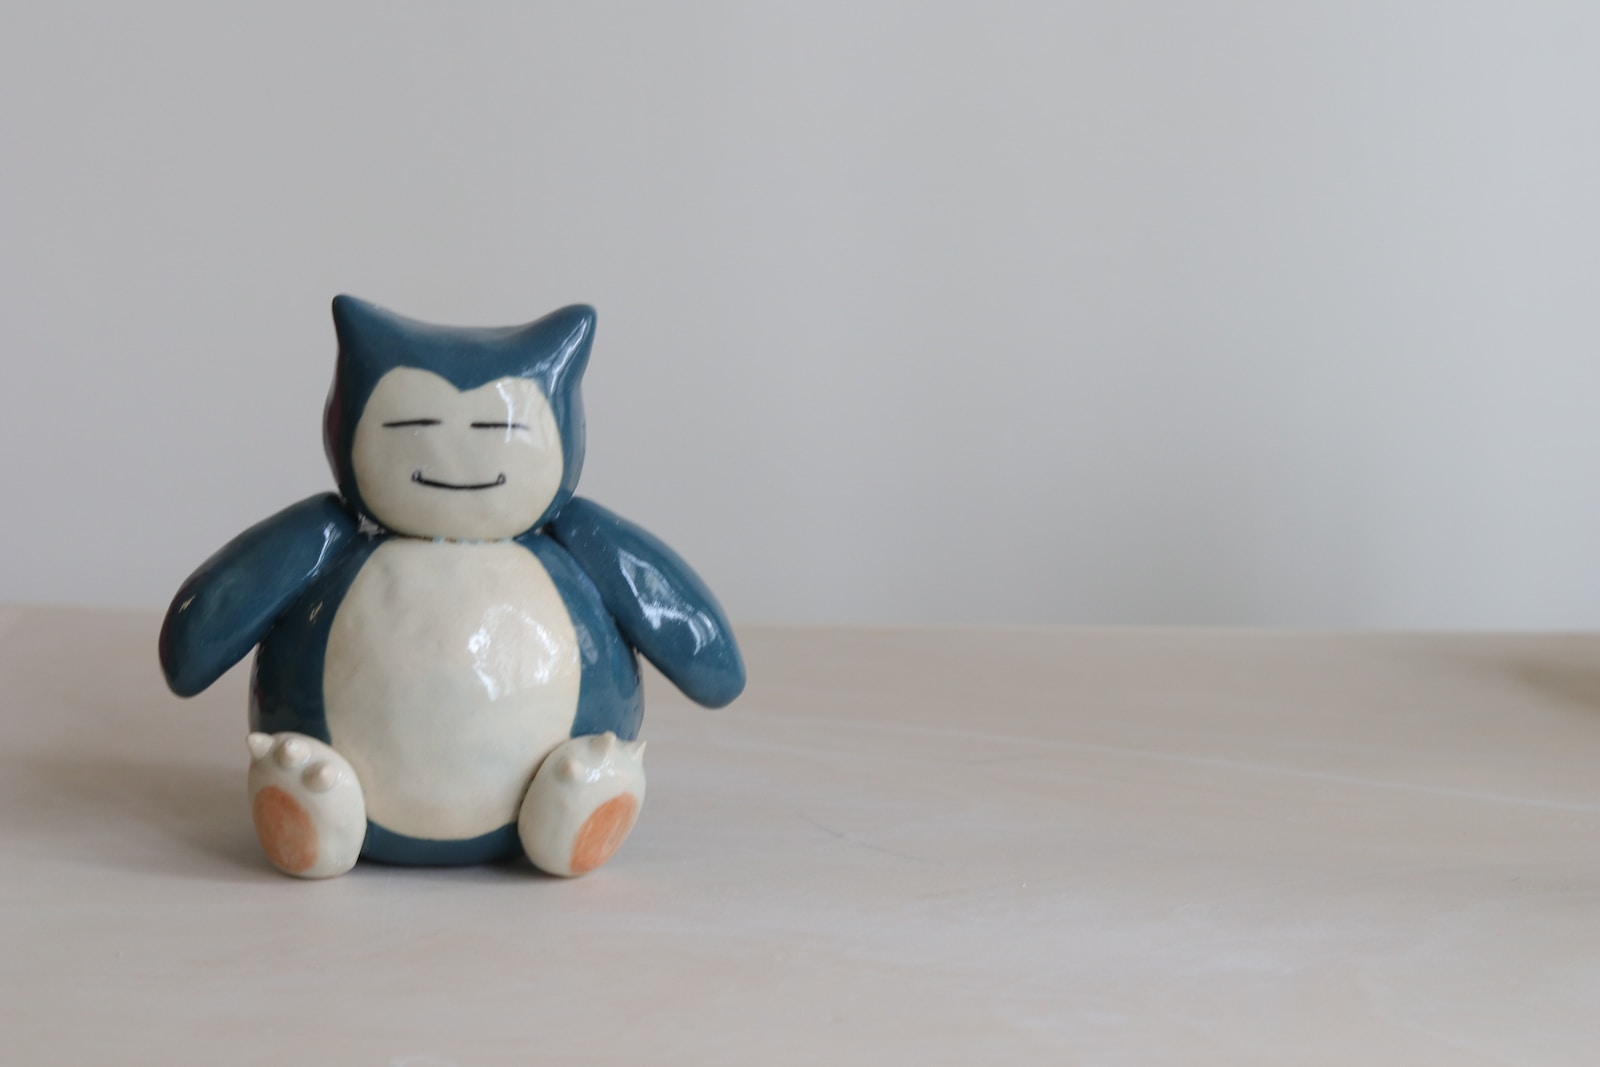 white and blue cat figurine